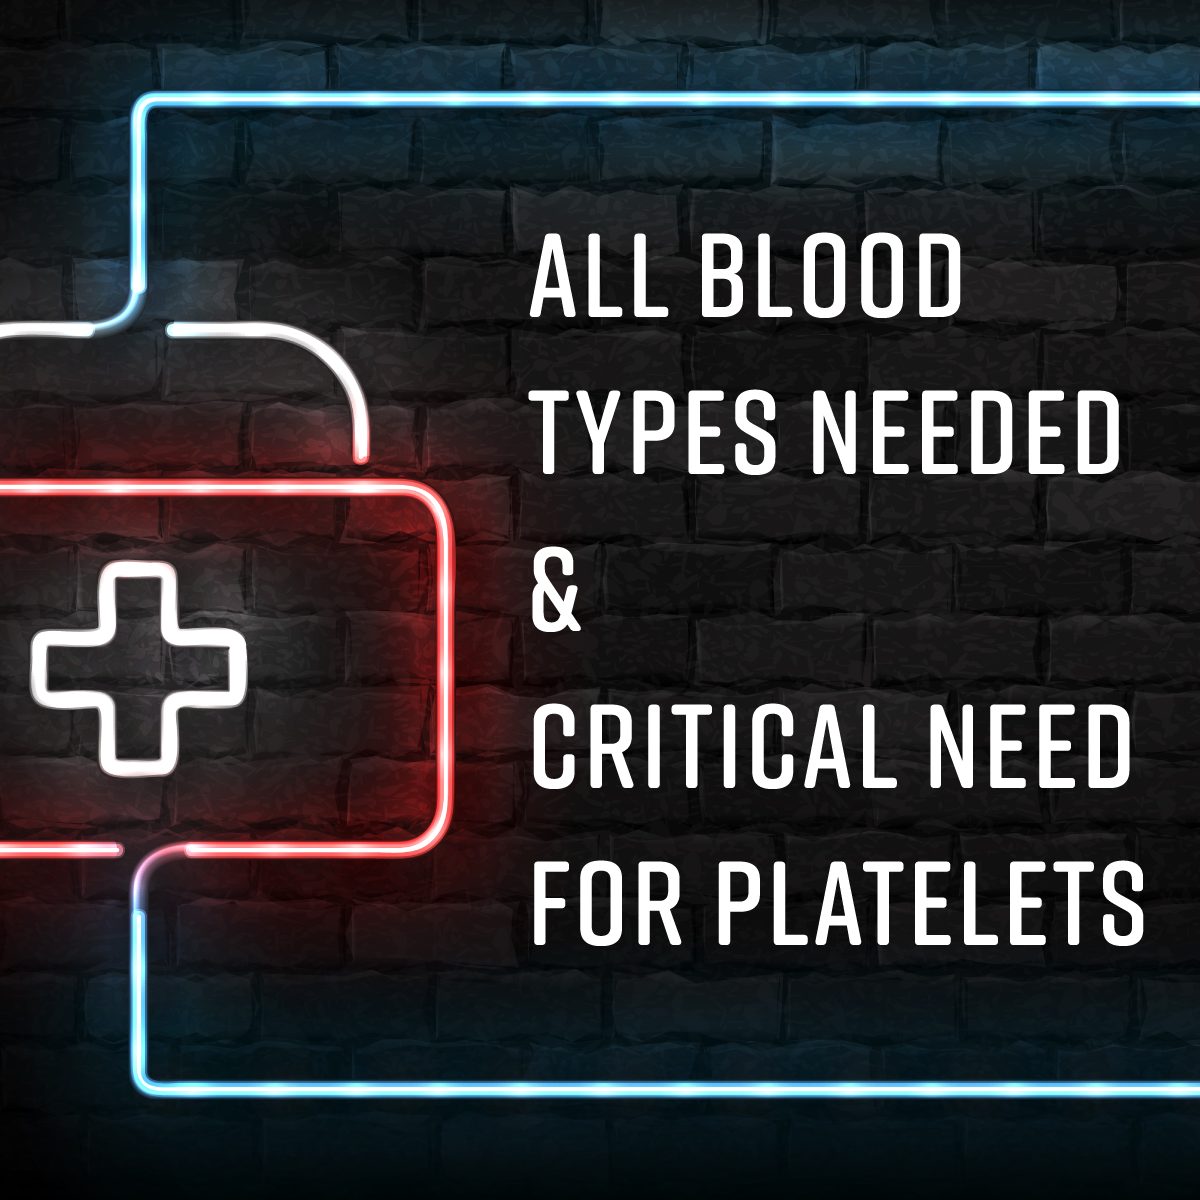 All blood types urgently needed — Critical need for platelets